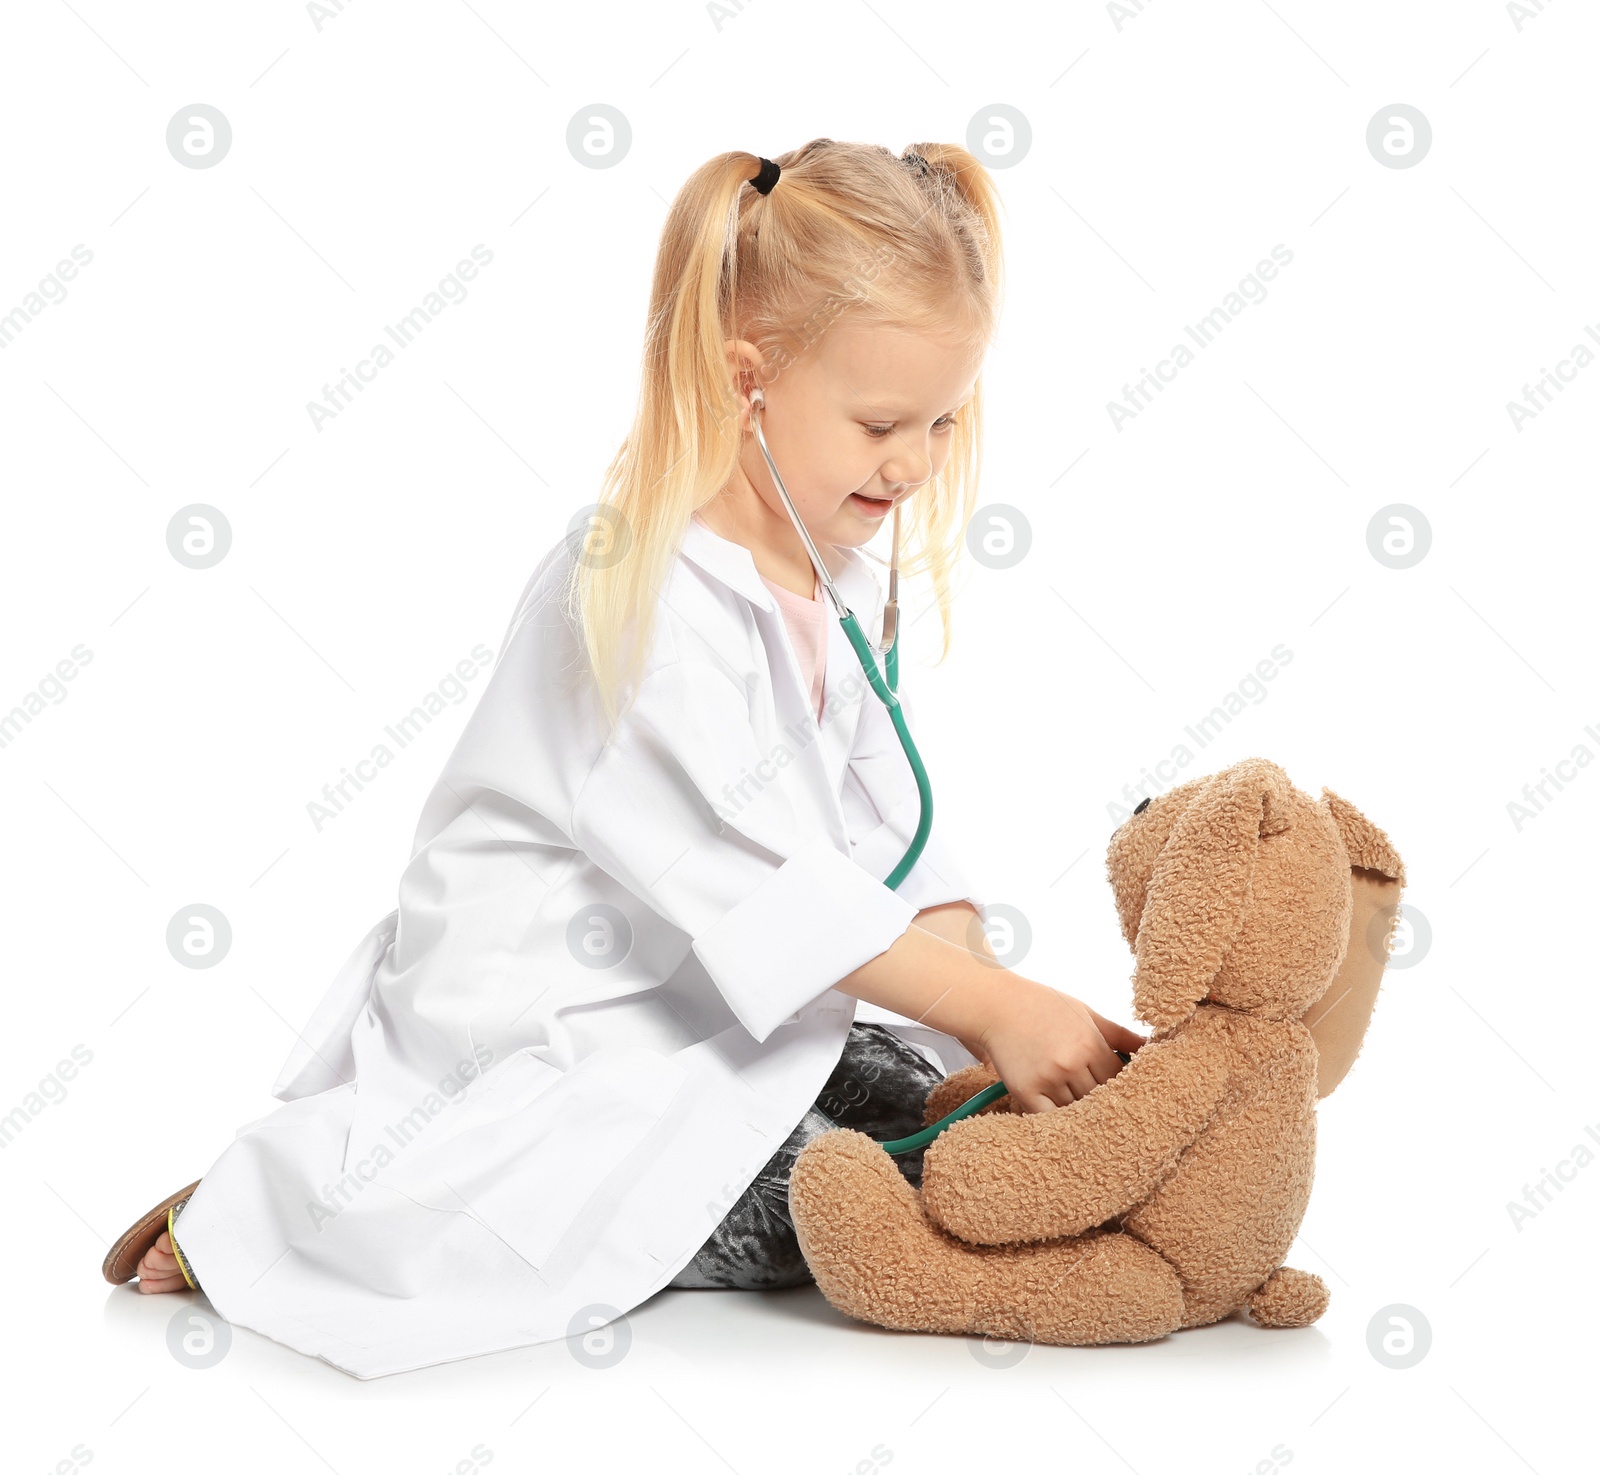 Photo of Cute child imagining herself as doctor while playing with stethoscope and toy bunny on white background